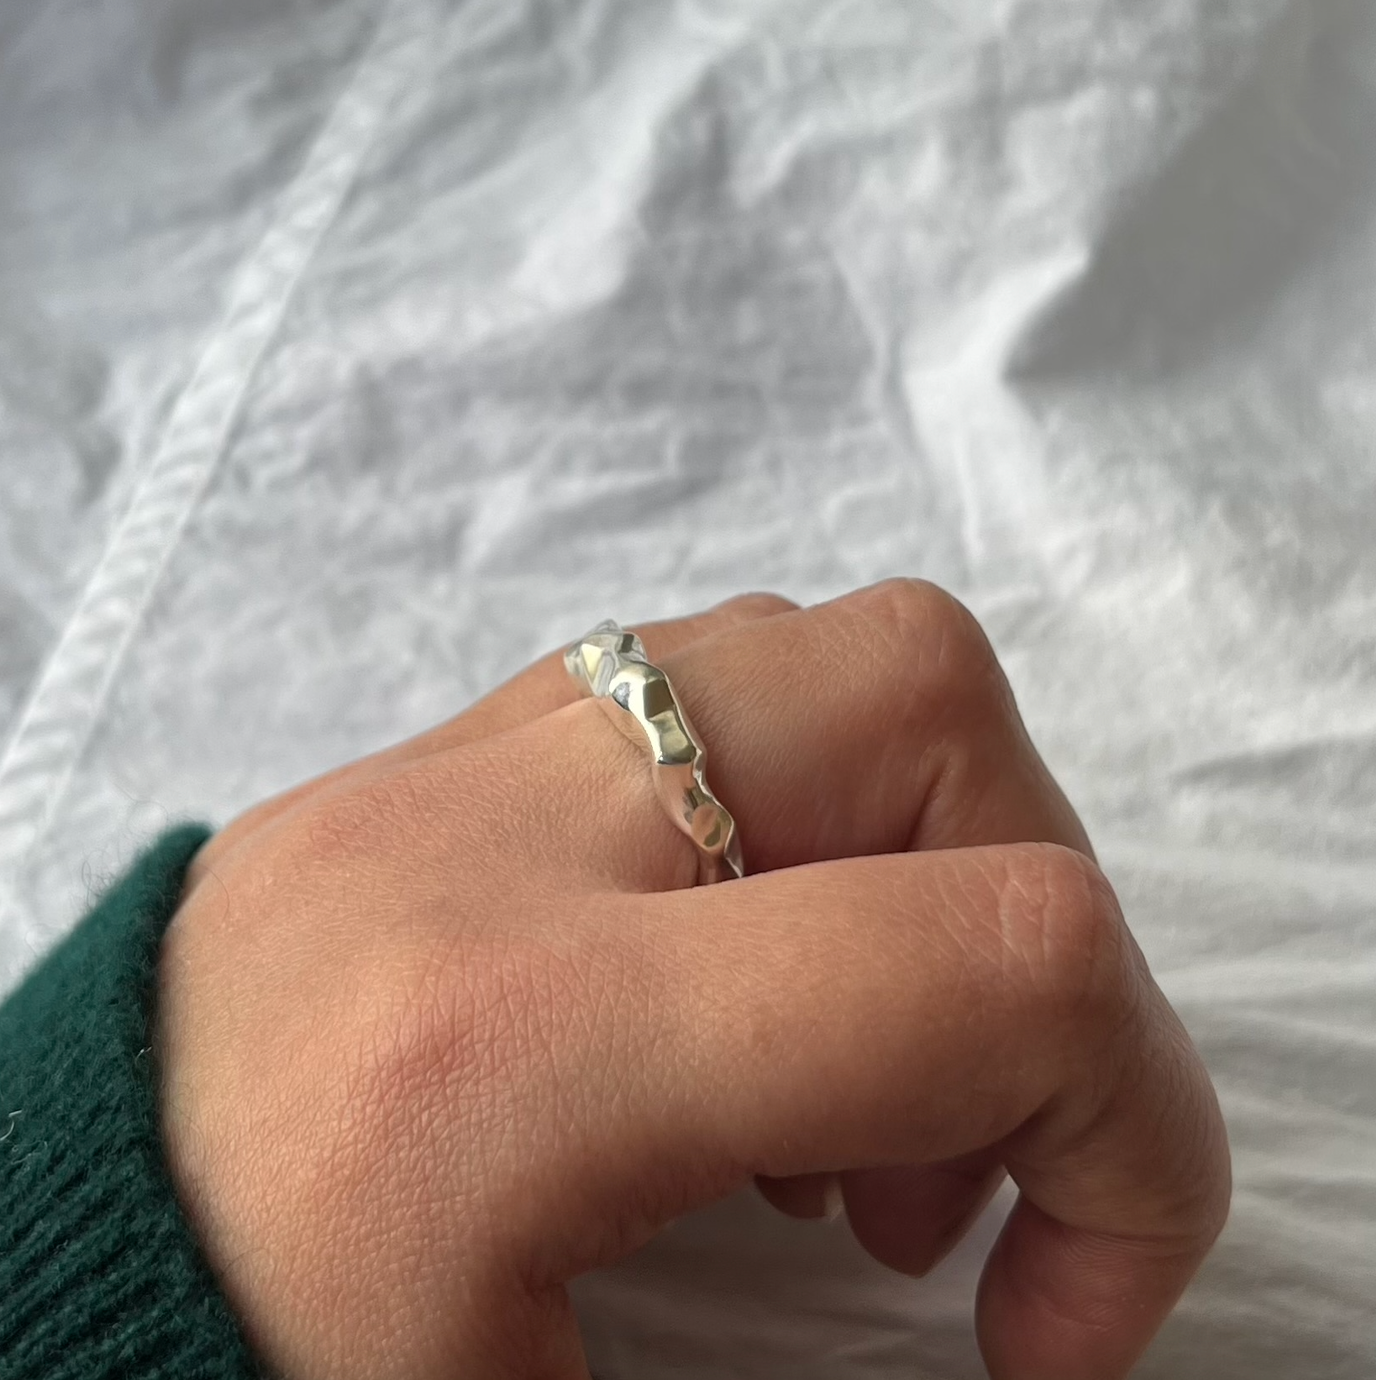 The Crinkle ring